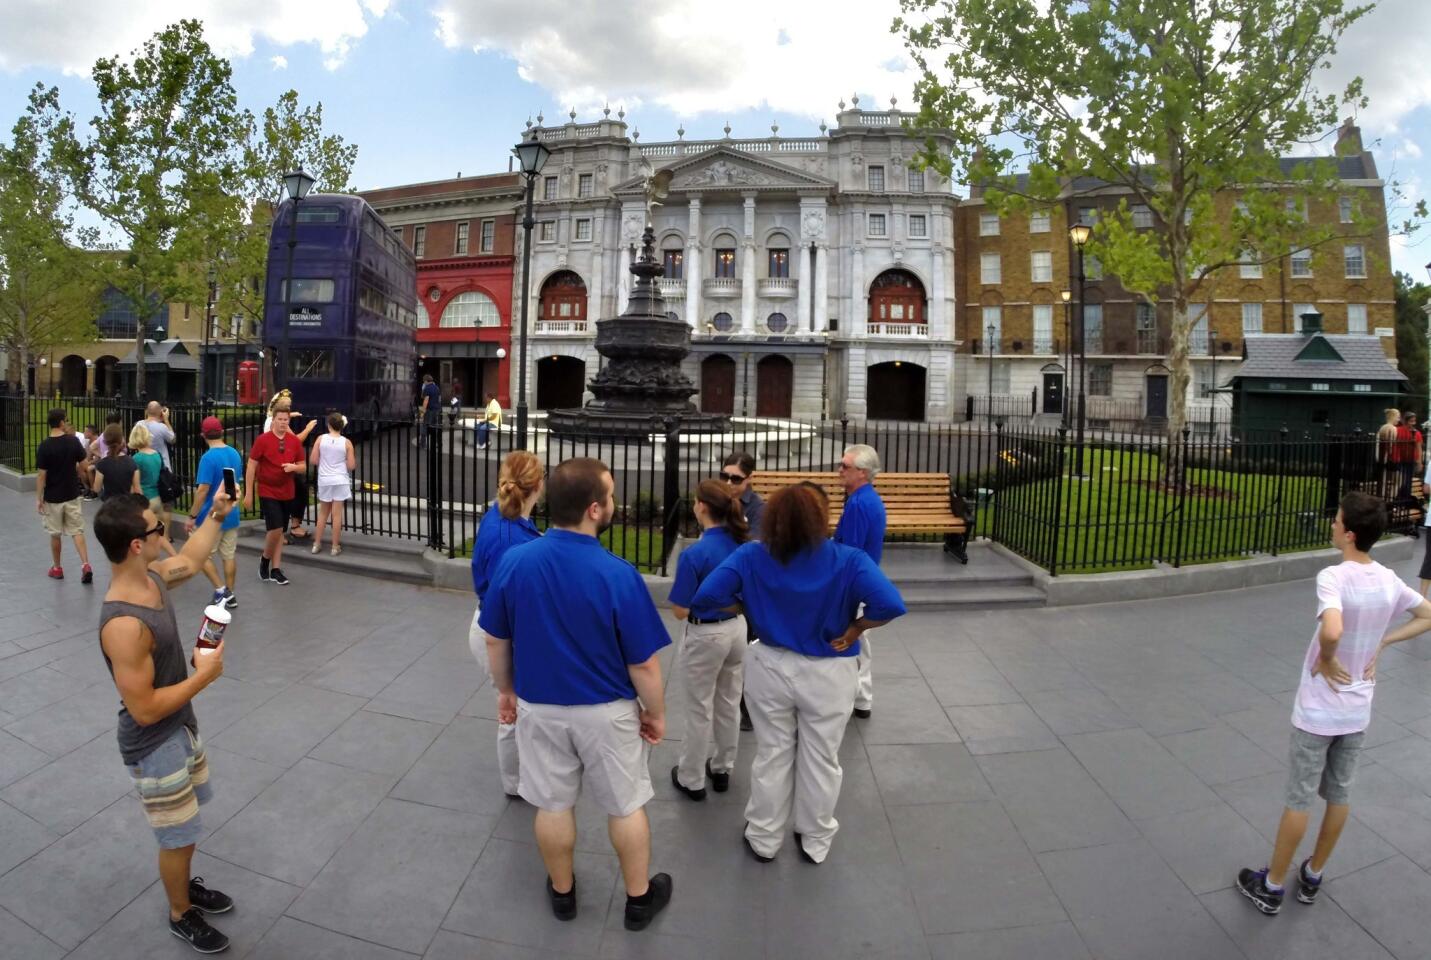 FIRST LOOK AT DIAGON ALLEY